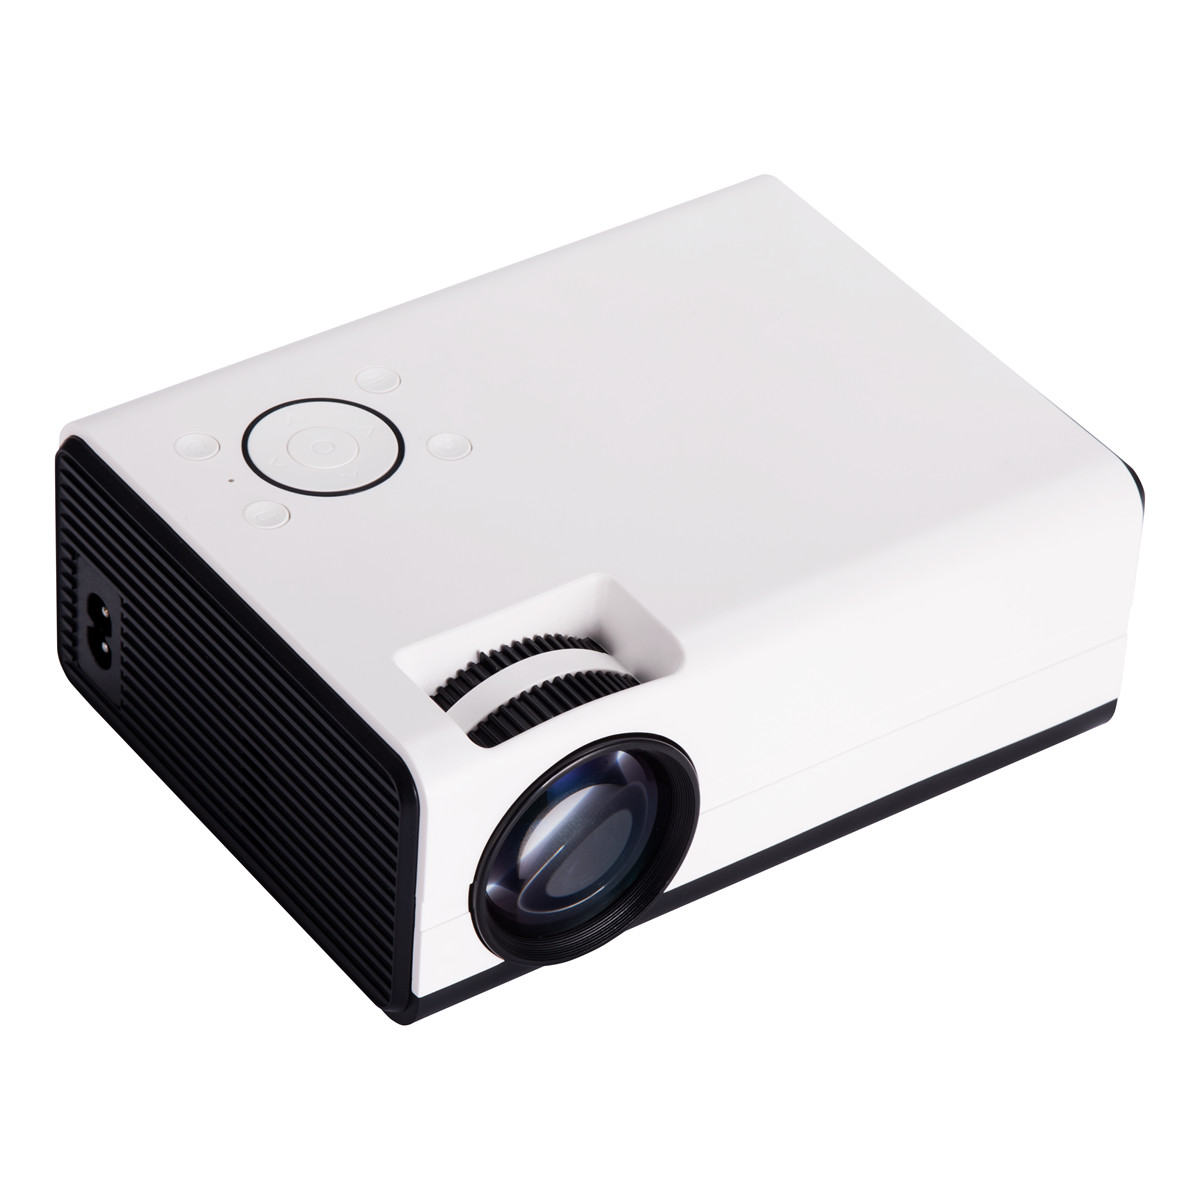 China Wifi BT5.0 4k Home Theater Projector Dual Band Android 9.0 OS factory